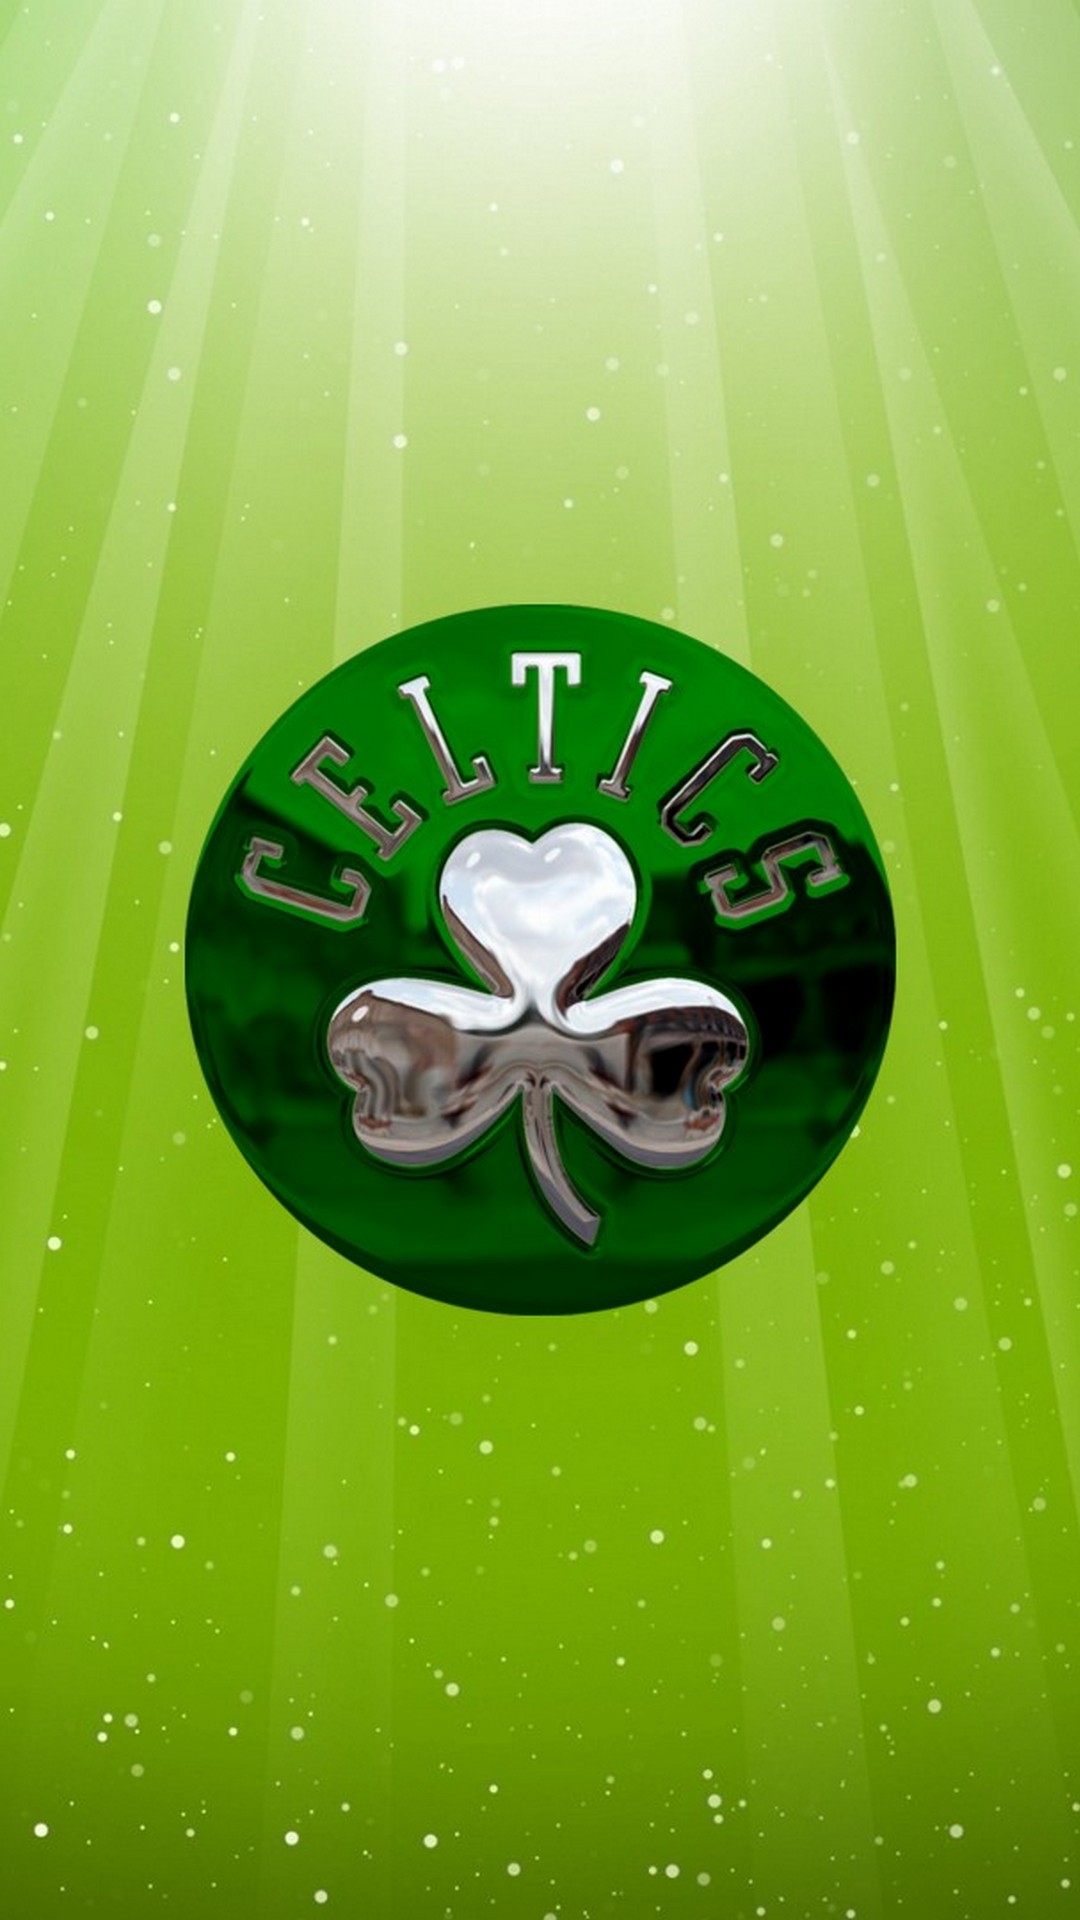 Boston Celtics Backgrounds For Android with image resolution 1080x1920 pixel. You can make this wallpaper for your Android backgrounds, Tablet, Smartphones Screensavers and Mobile Phone Lock Screen